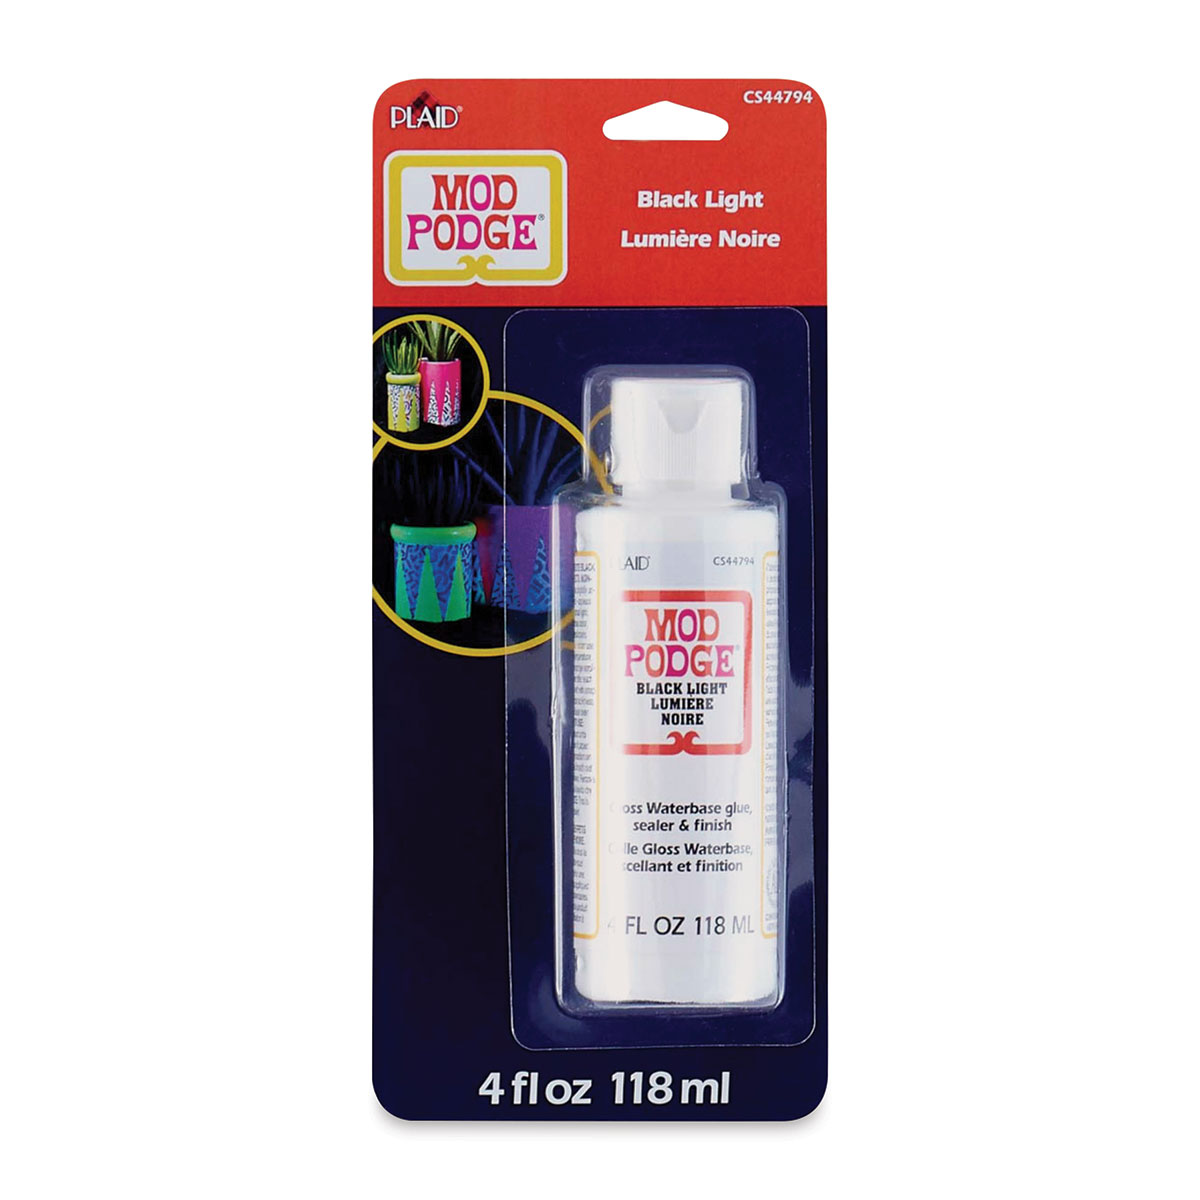 Mod Podge of the Water-based Plaid Gloss Finish Mat Glue Waterproofing  Paint 118ml 